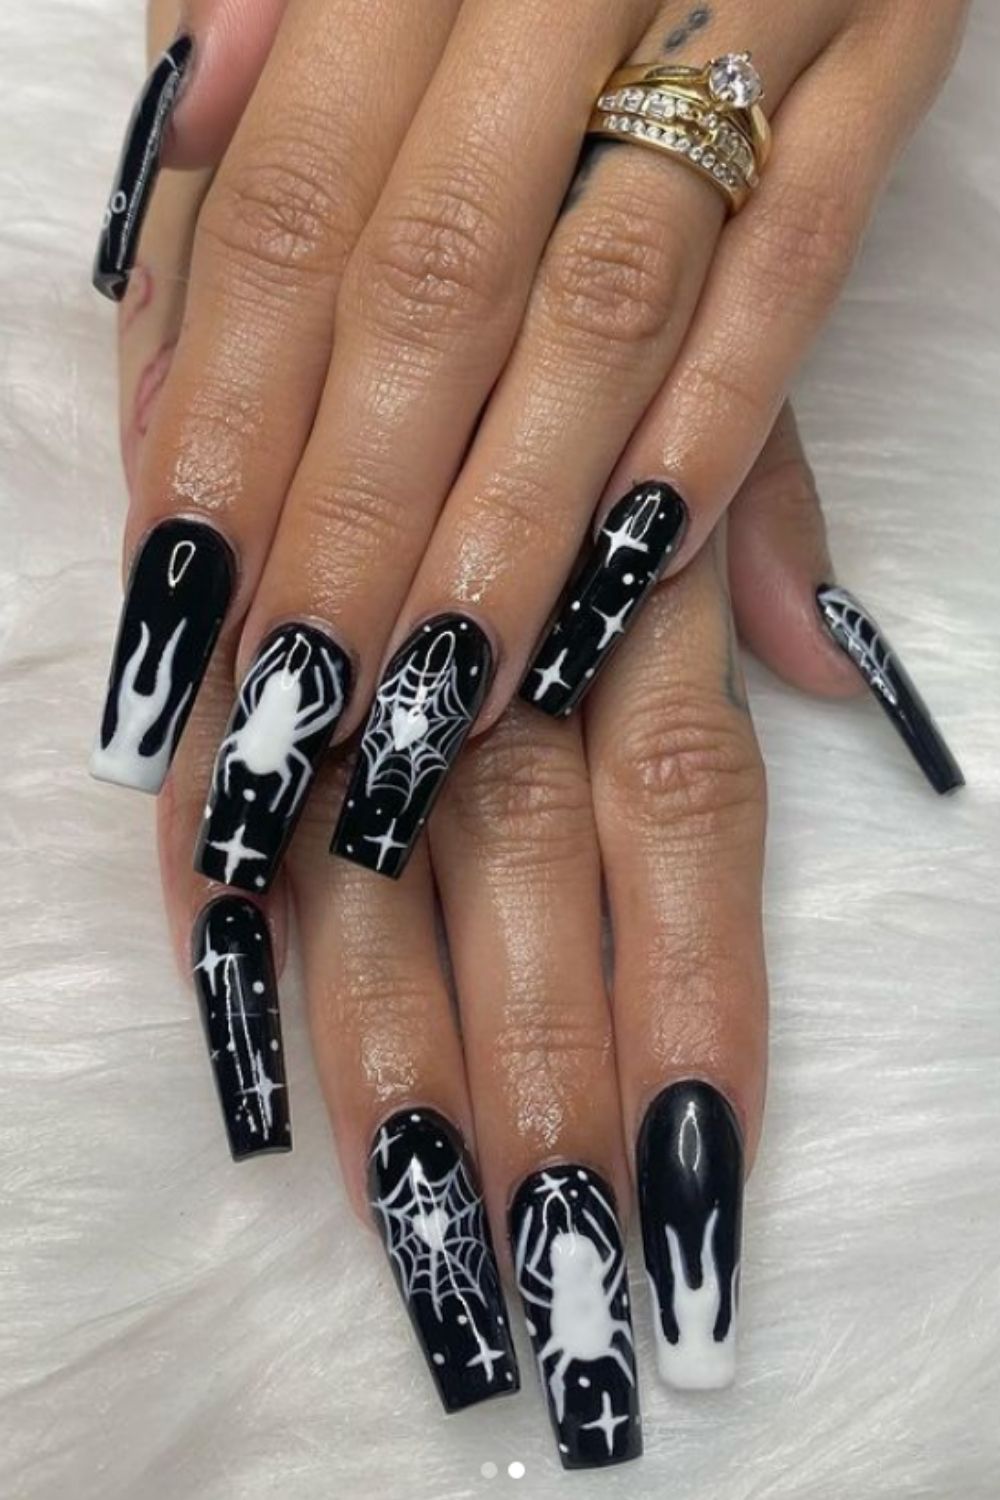 Black and white halloween acrylic nails